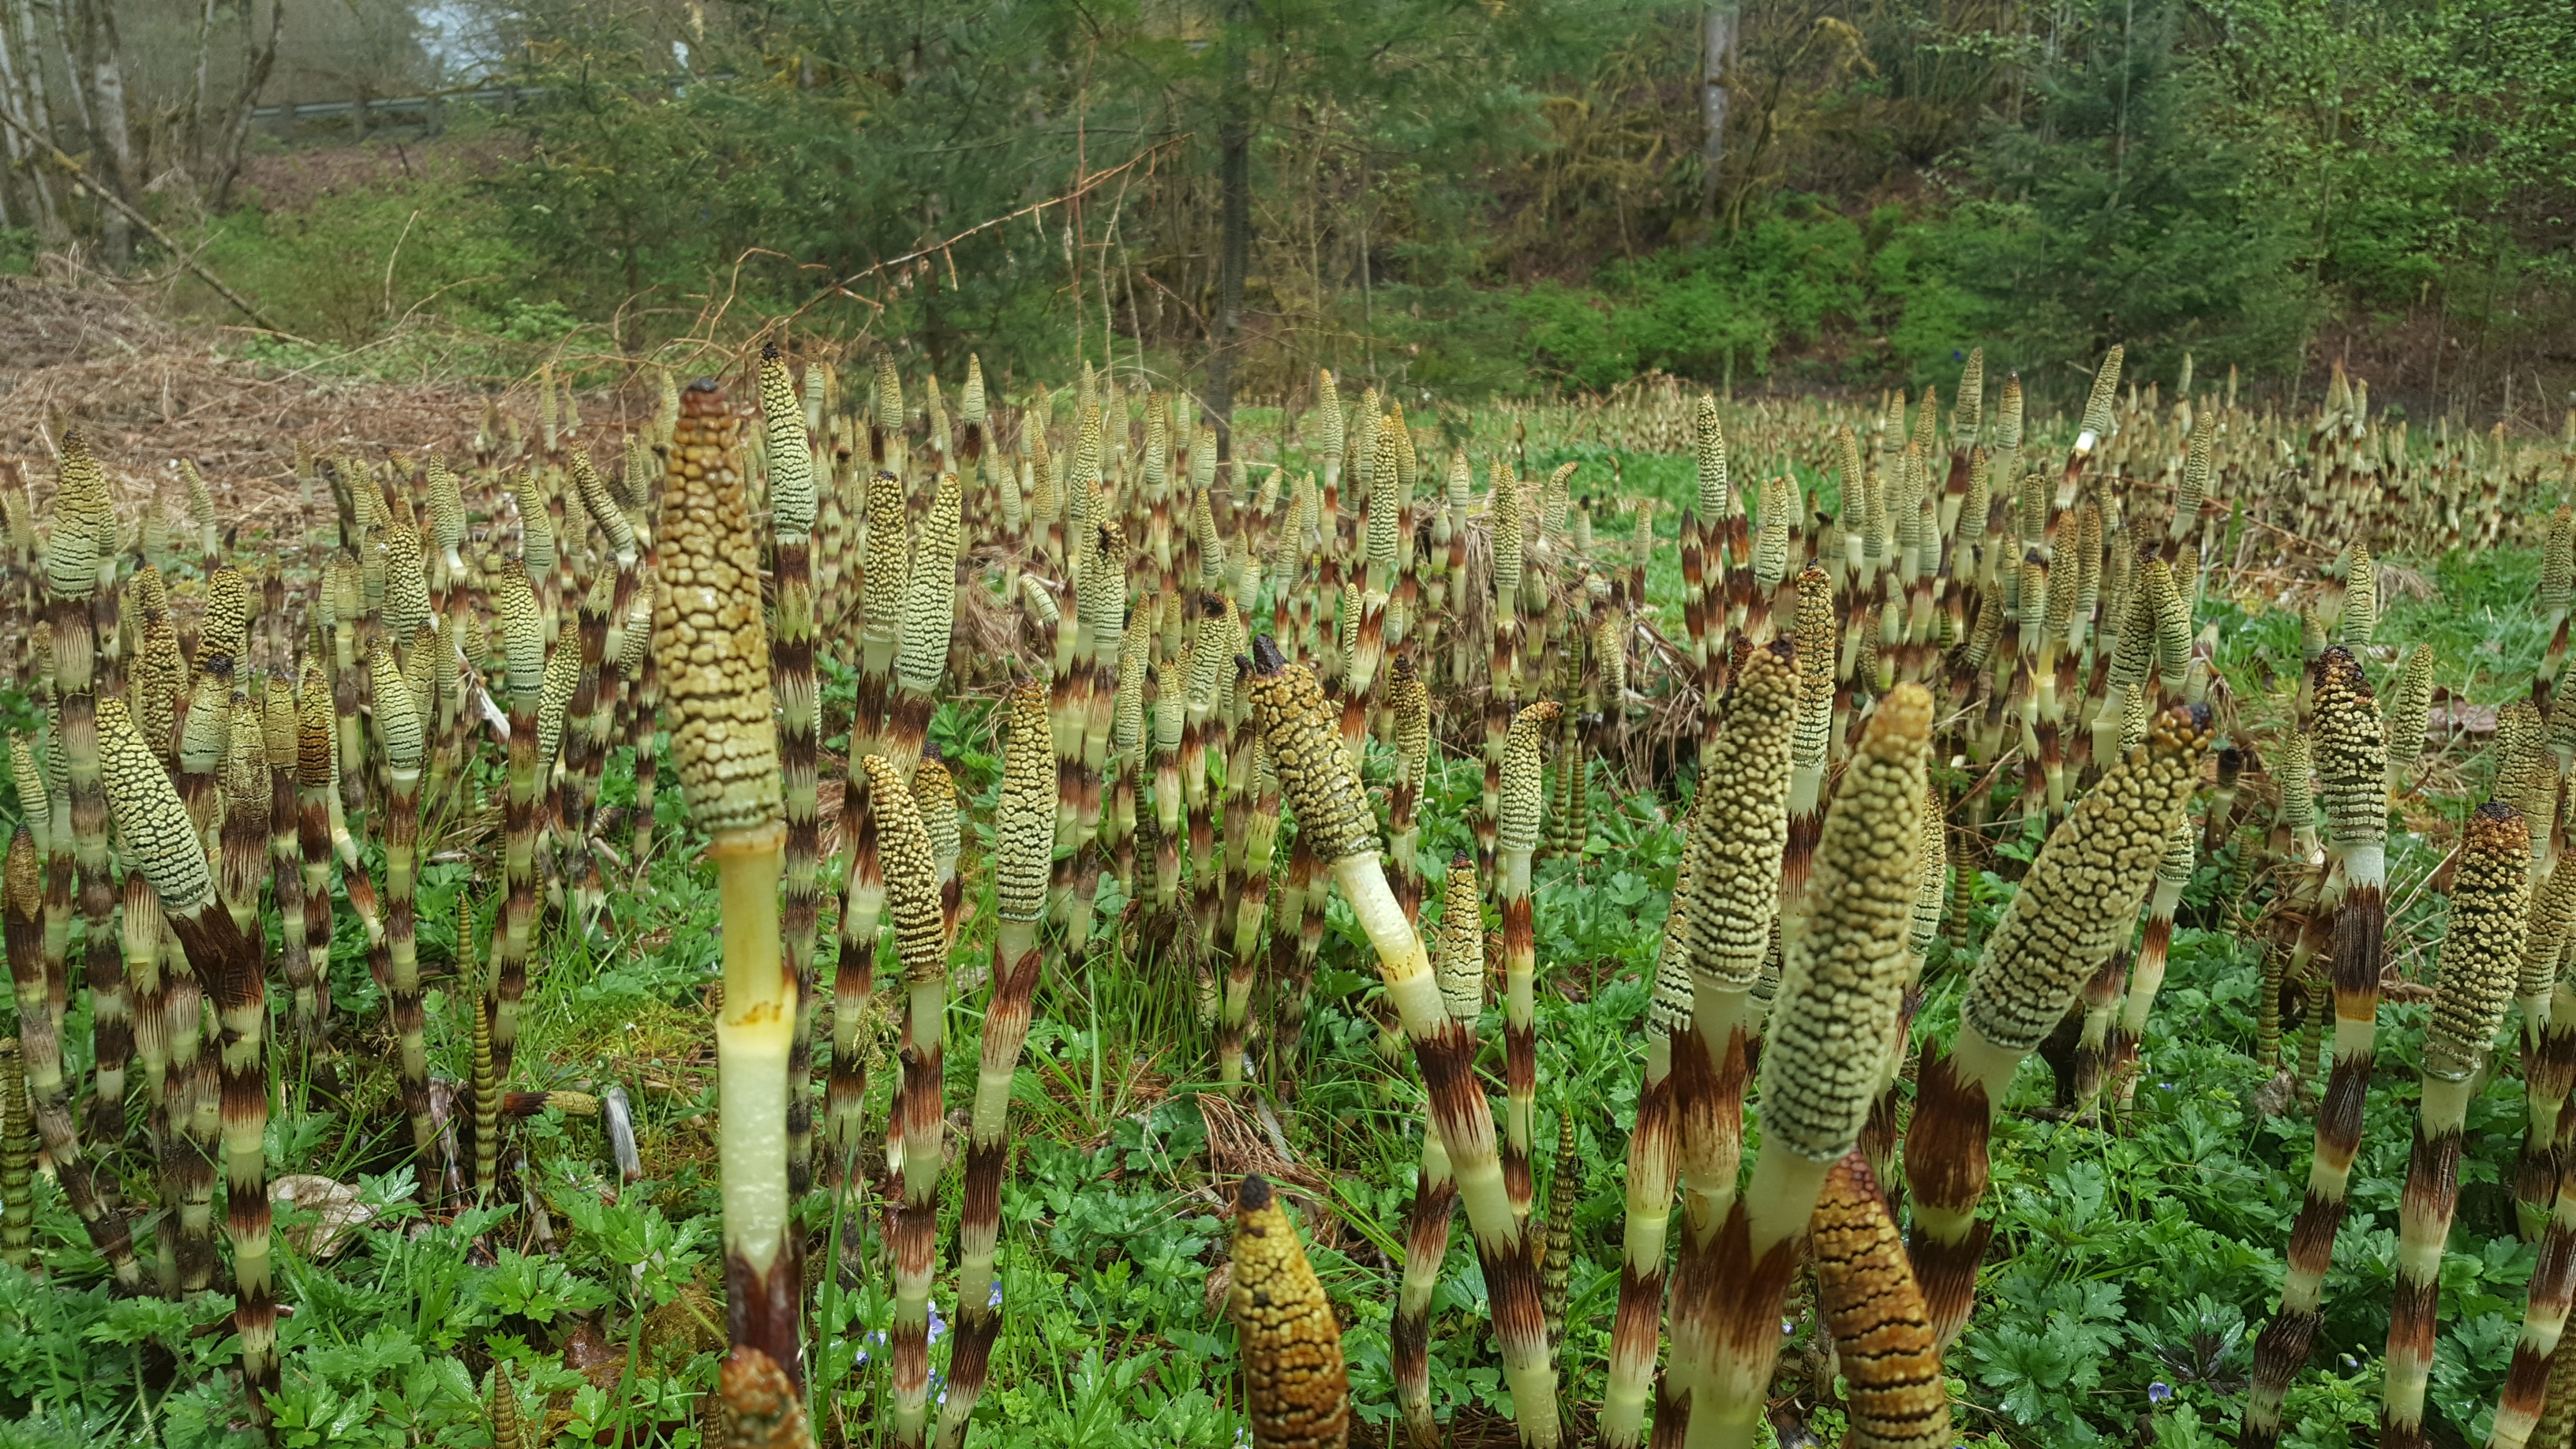 Horsetails emerge in early April at Jackman Creek Conservation Area. Photograph credit: Skagit Land Trust staff.